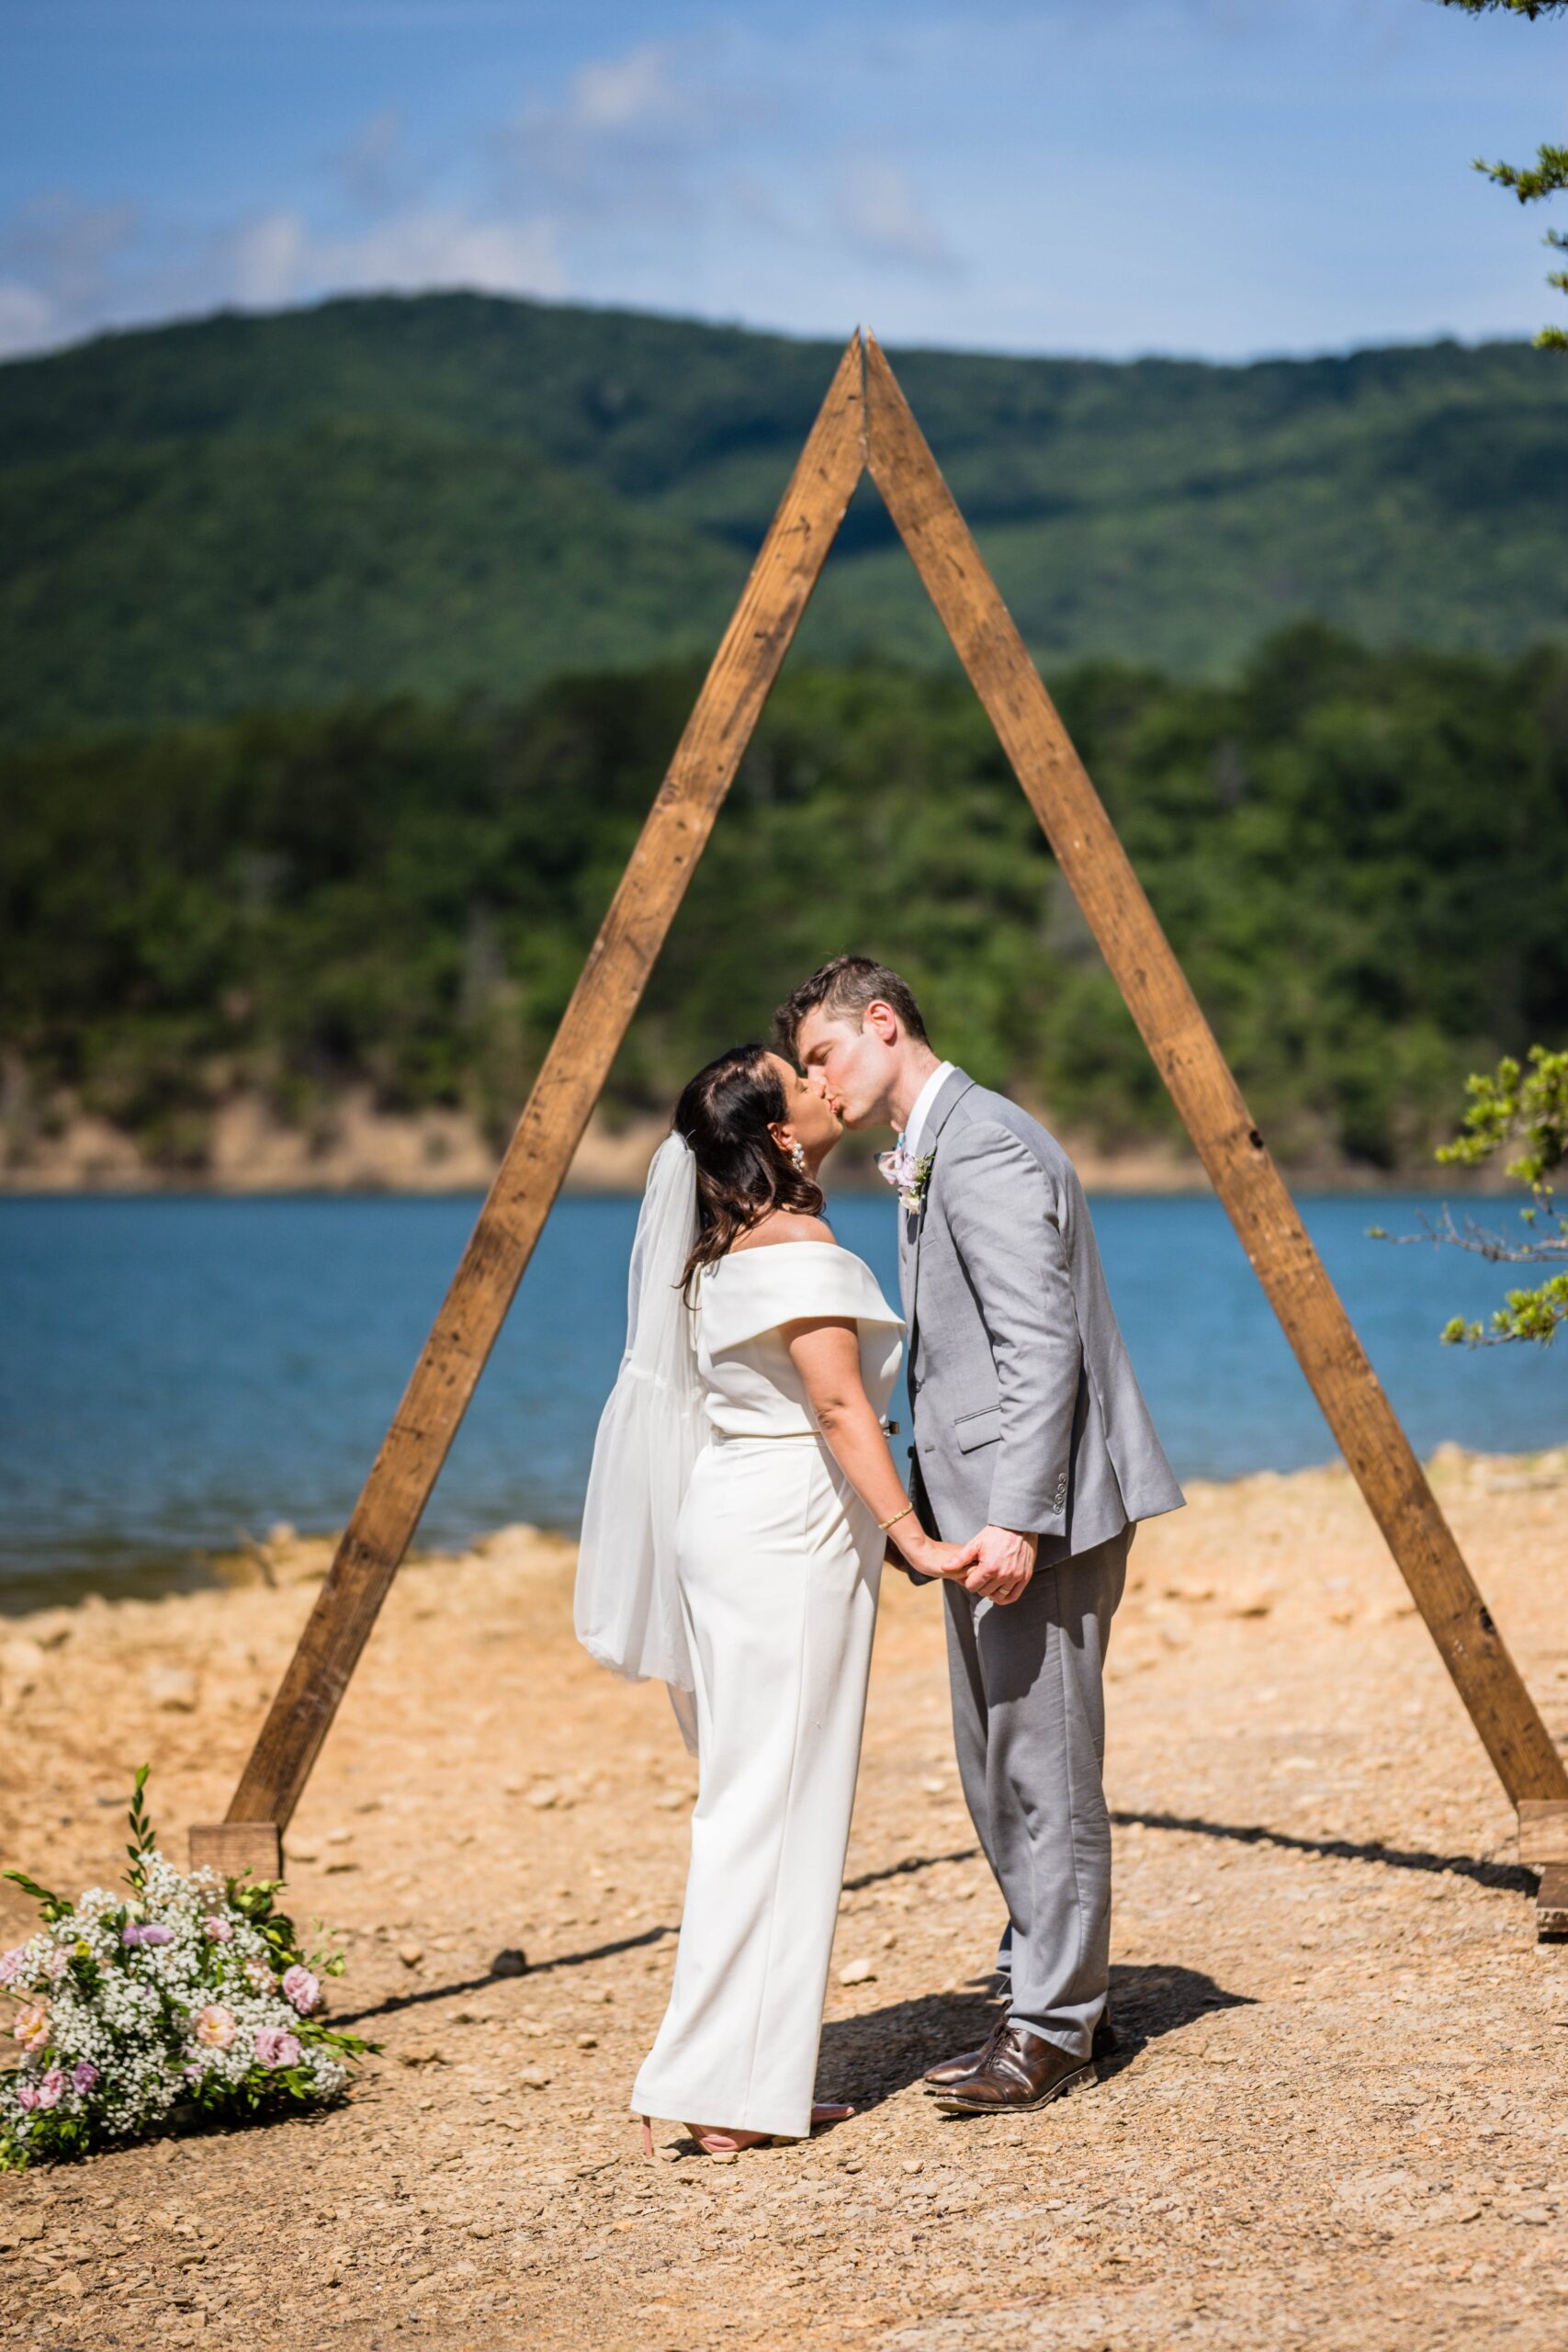 A wedding couple kisses under a ceremony arch during their Virginia elopement at Carvin's Cove.